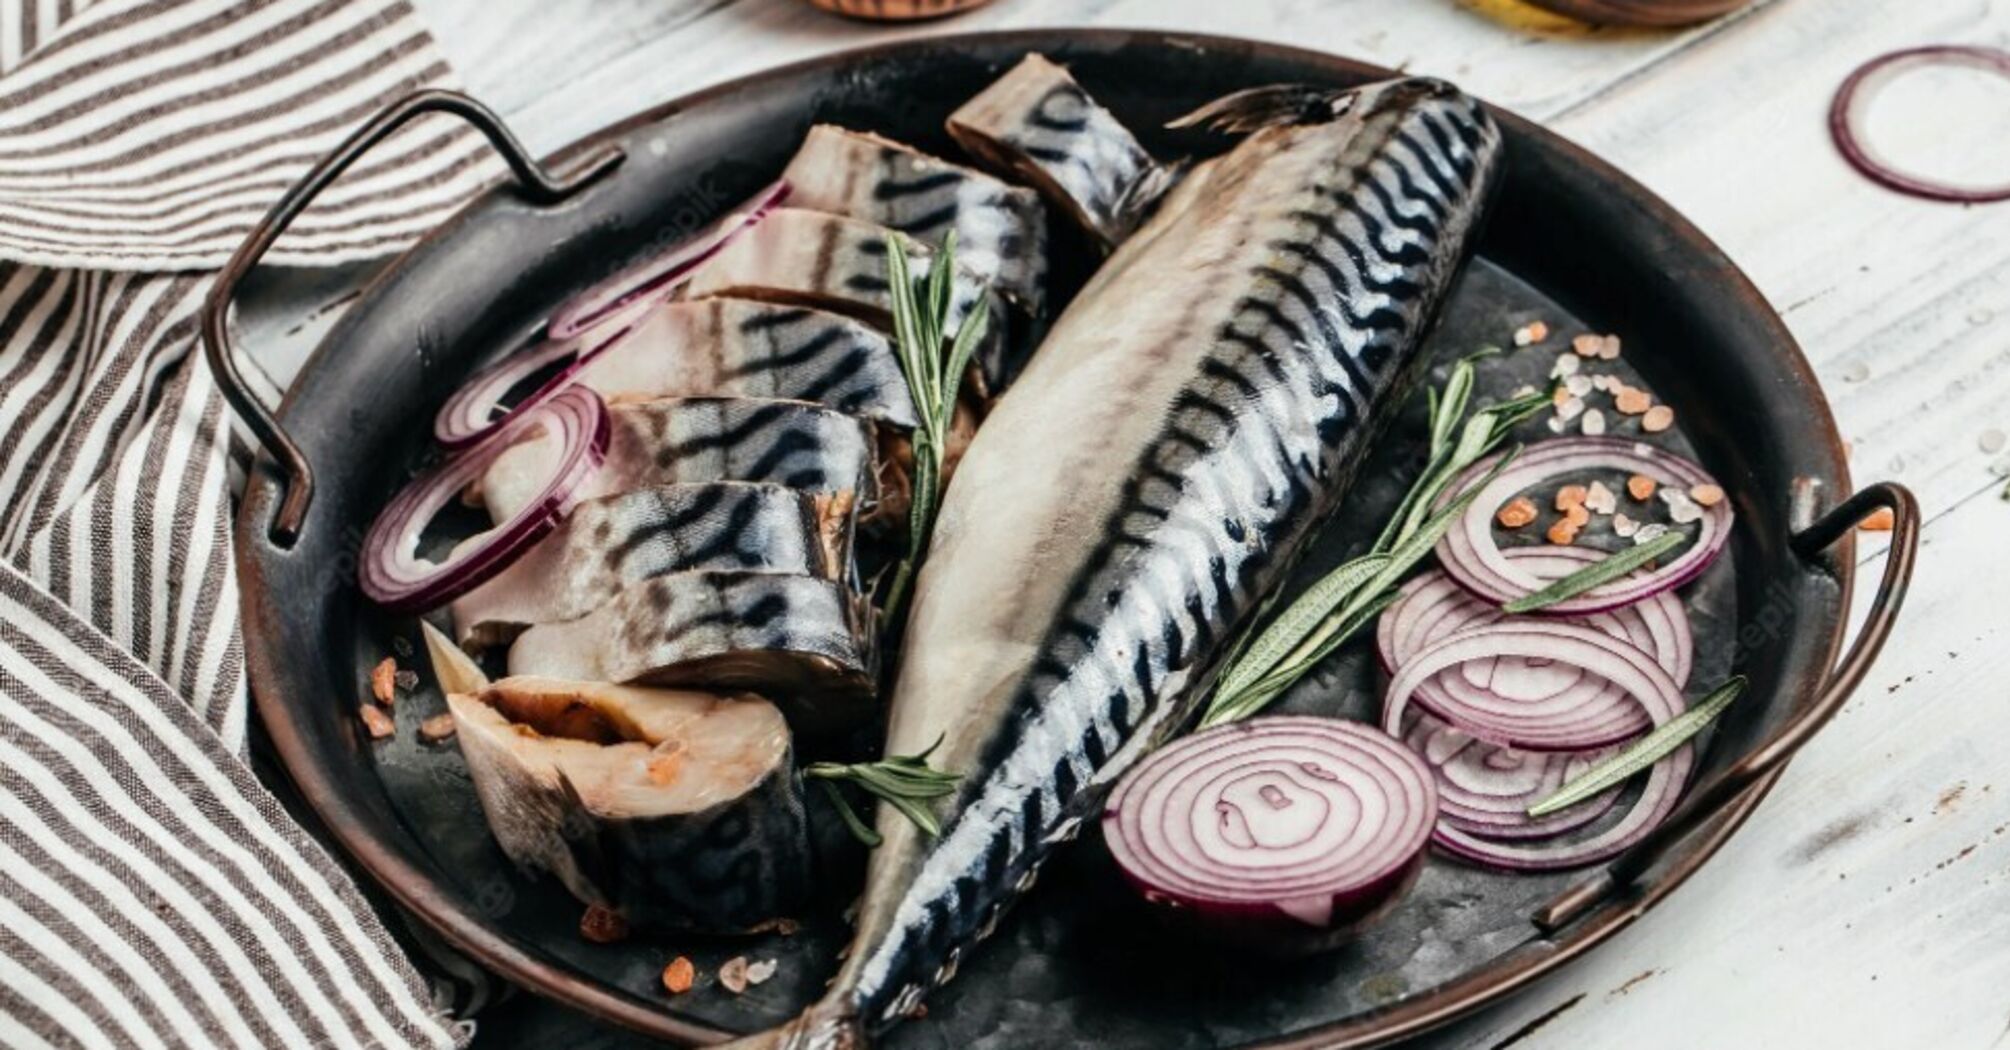 Delicious five-minute mackerel: what to marinate fish in